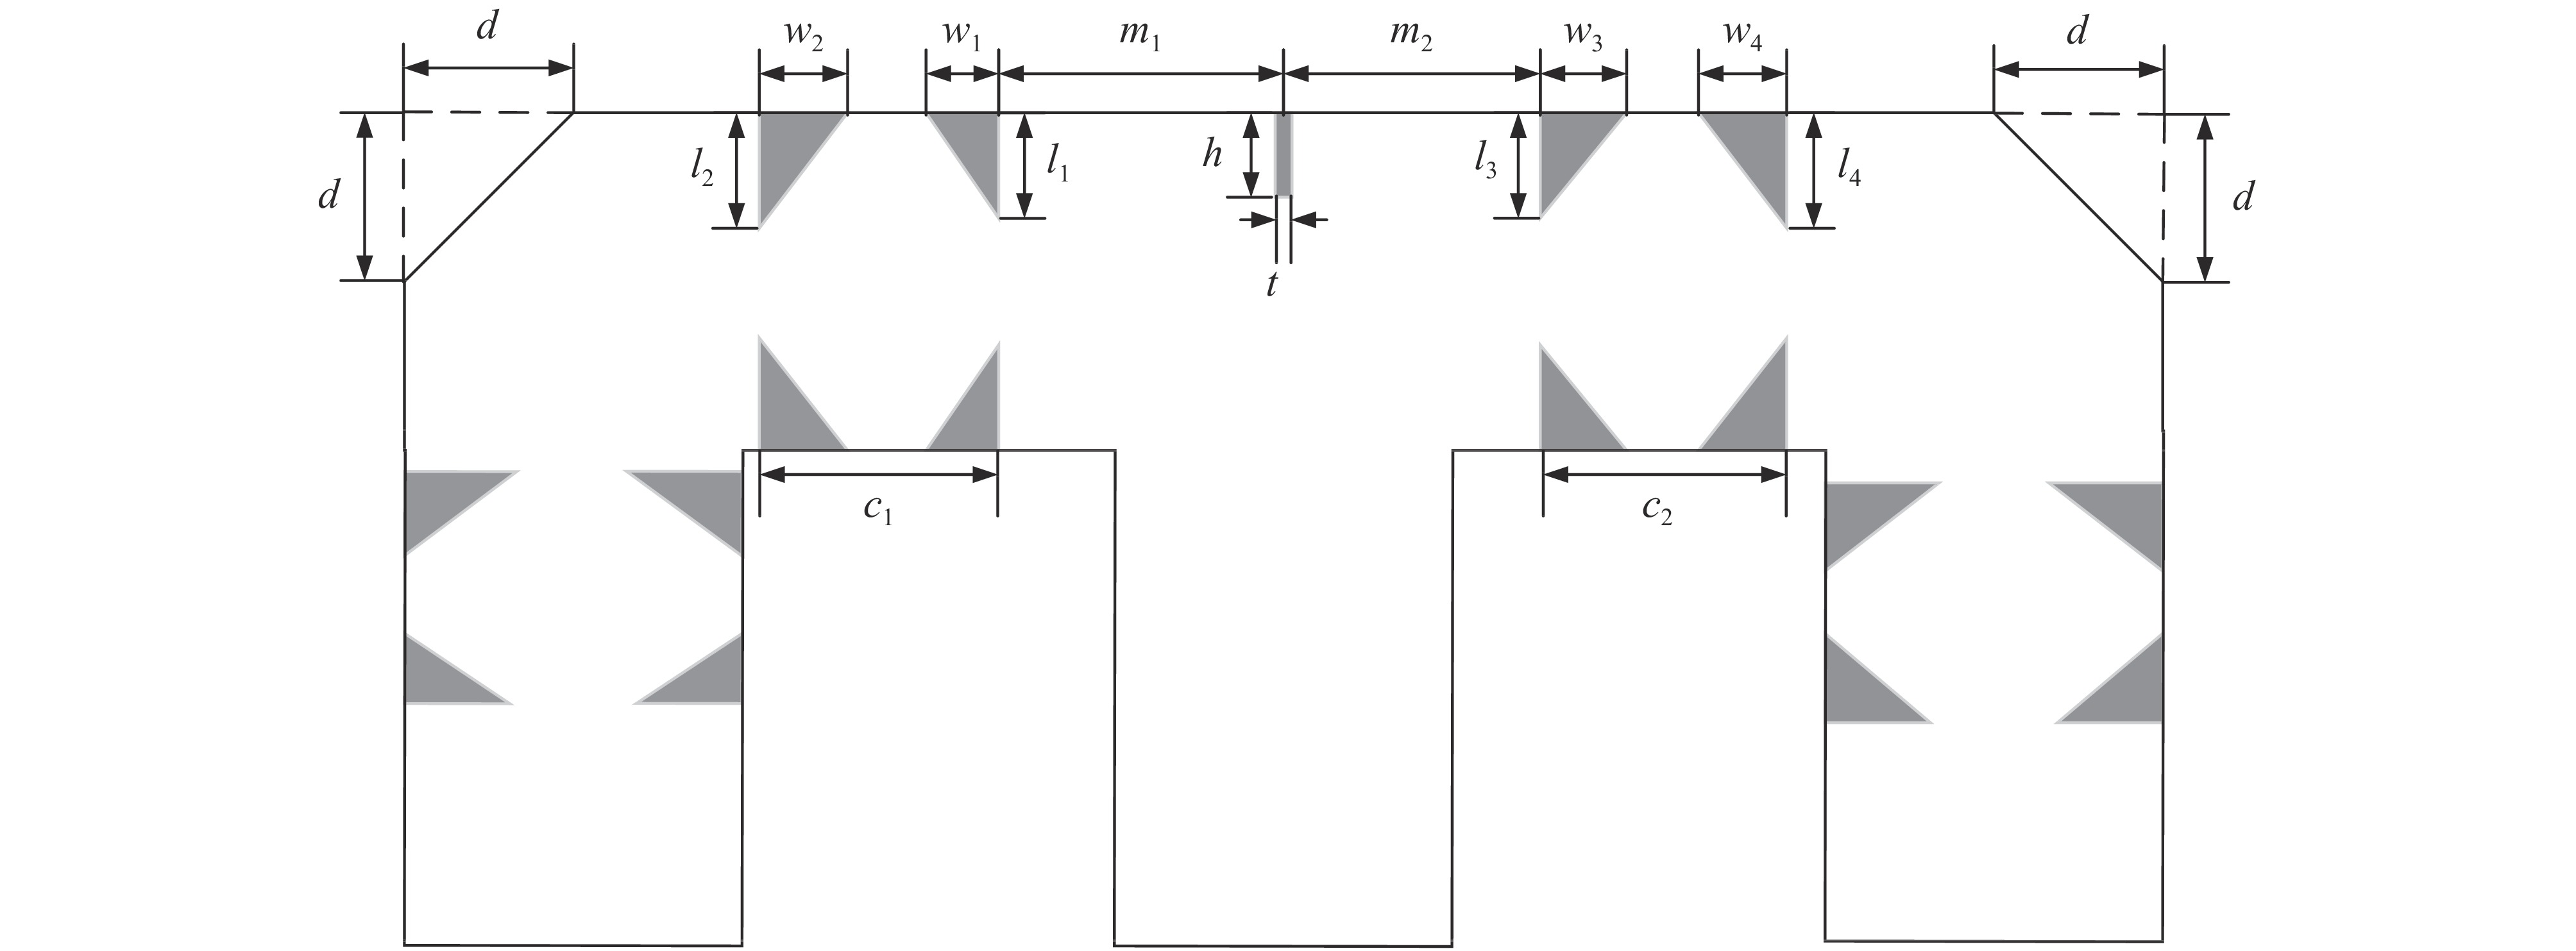 Structure of the diplexer